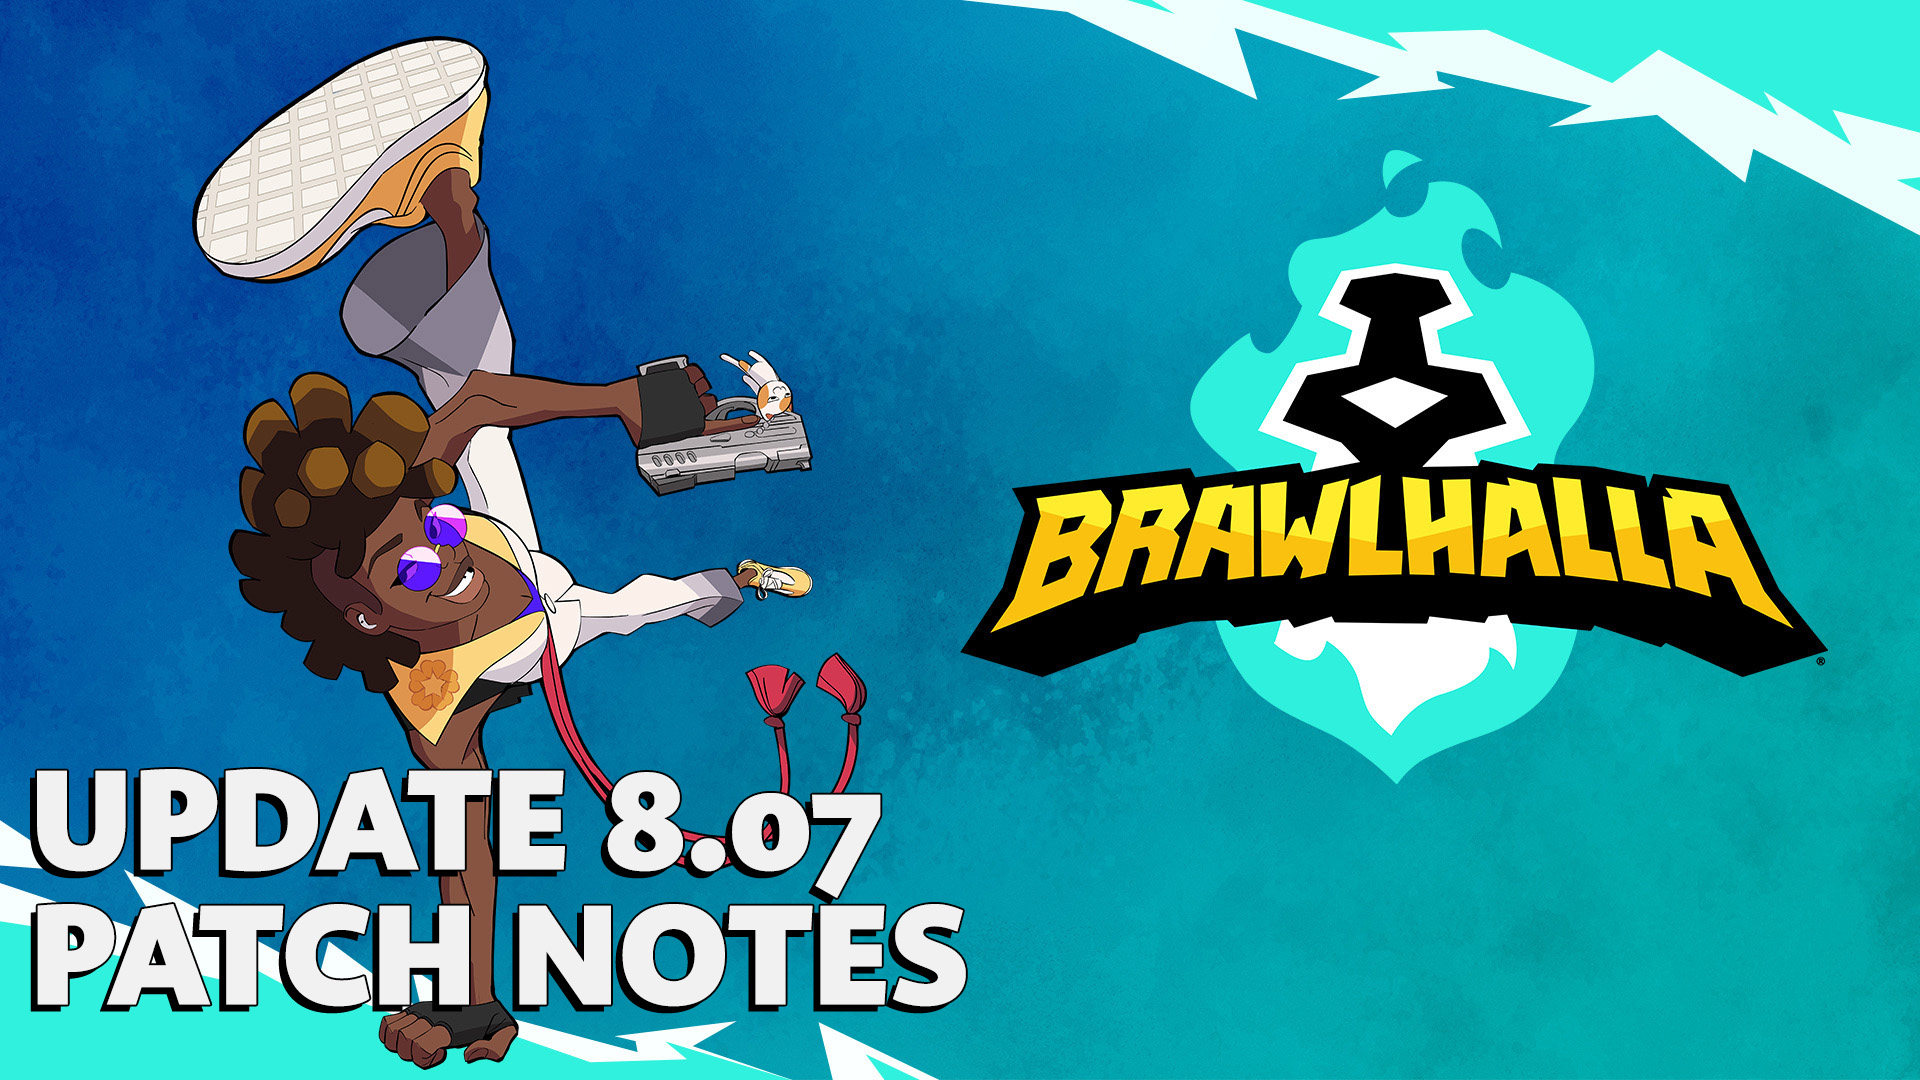 New Legend: Vivi, Custom Game Settings Overhaul, and New Test Features! – Patch 8.07